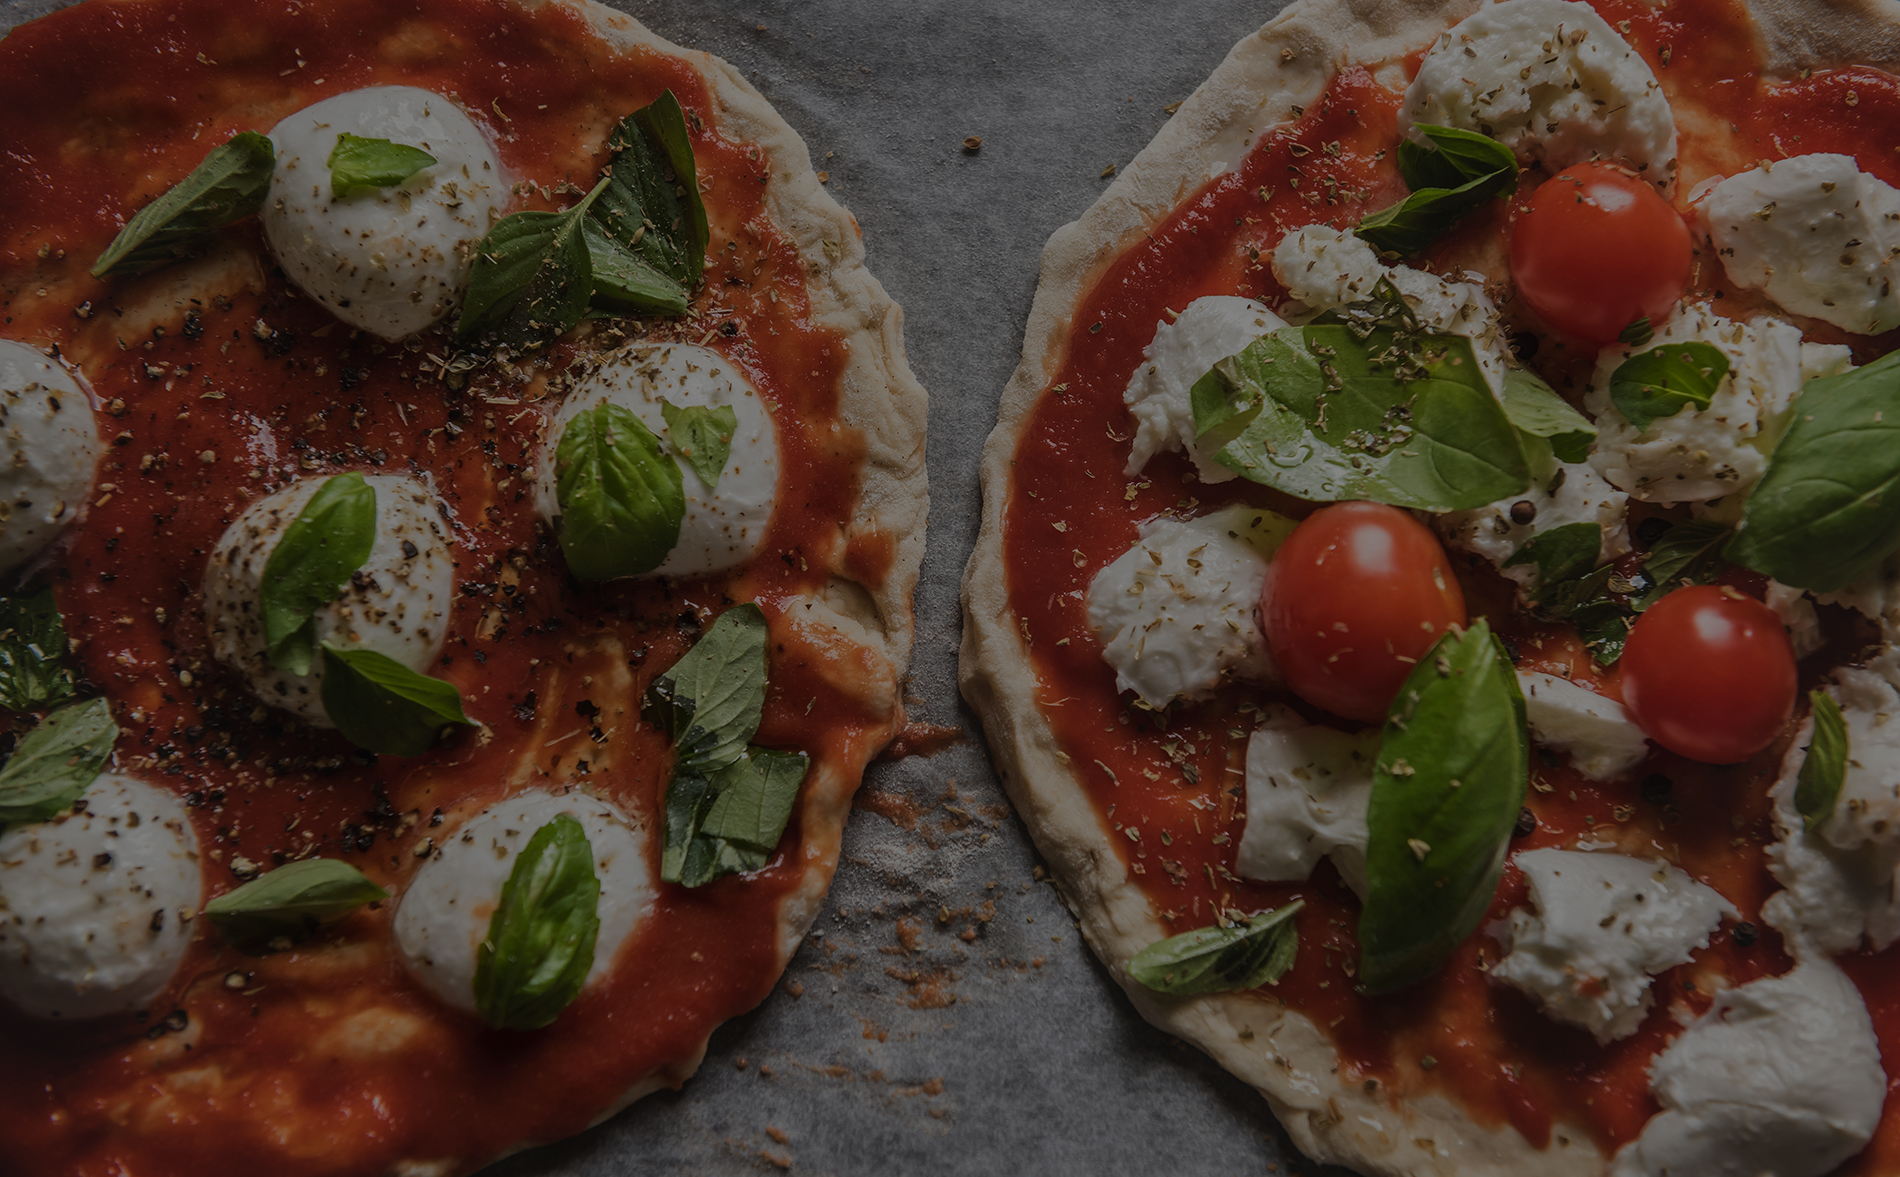 Enjoy low-FODMAP pizza this national pizza day!